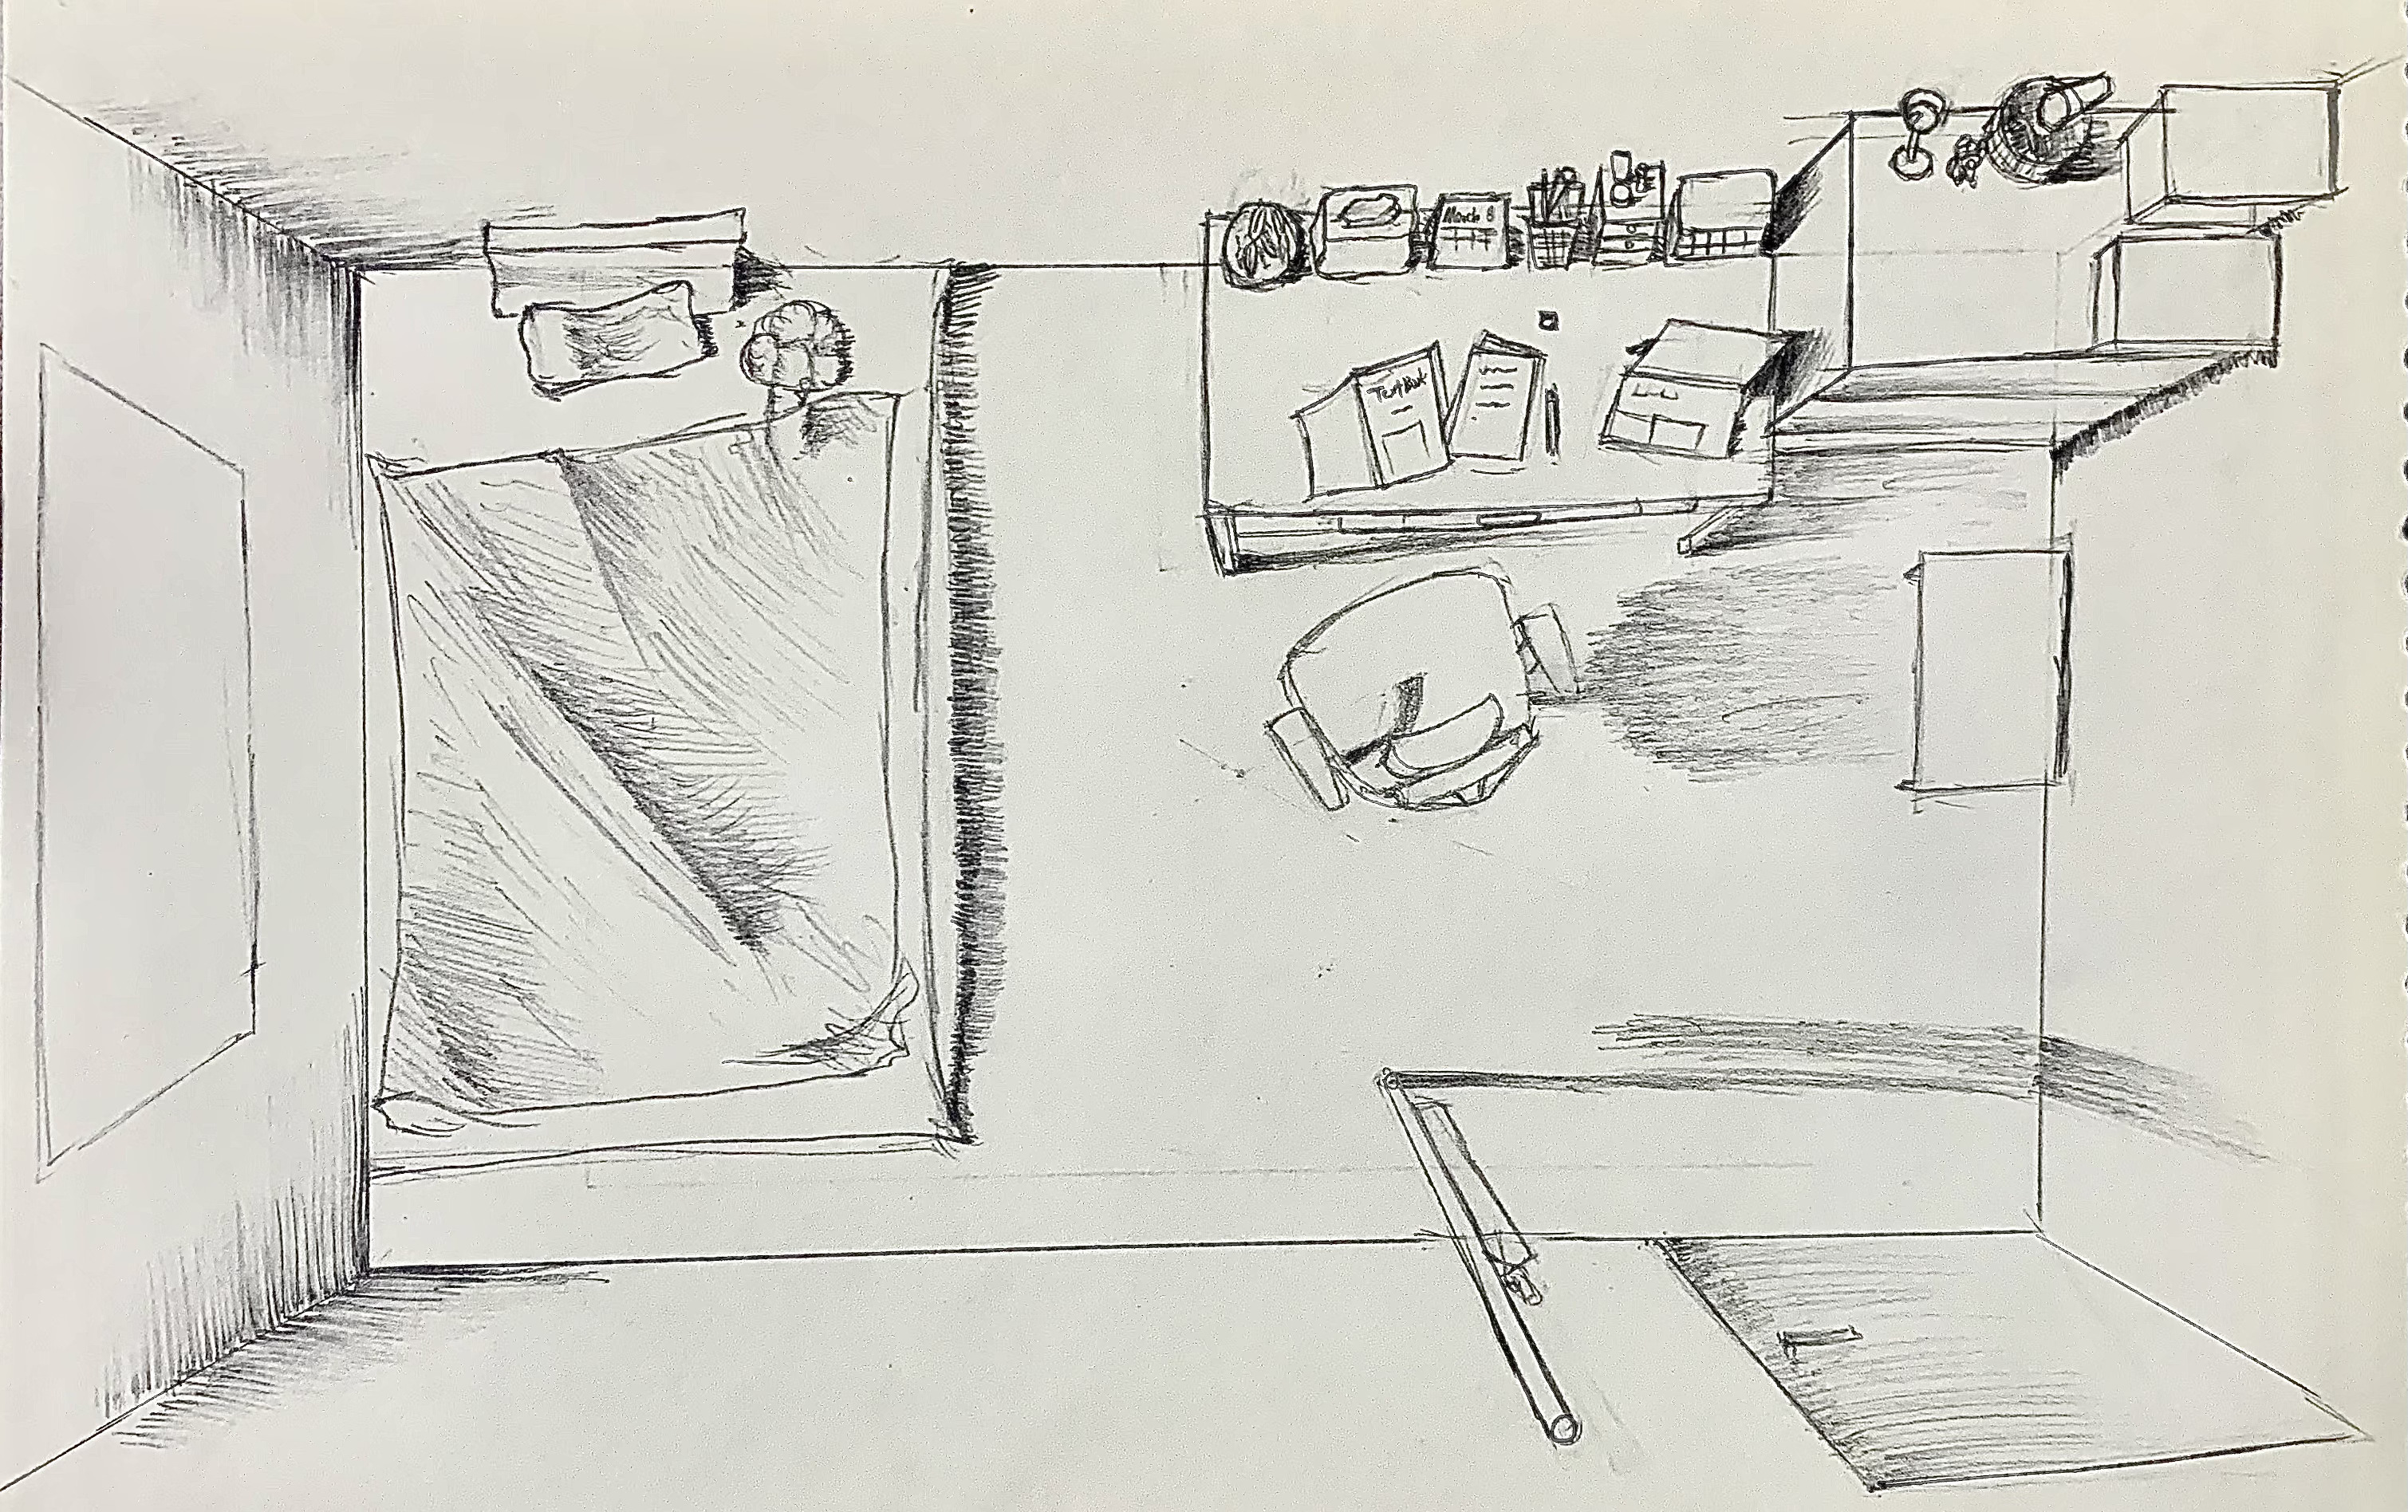 Sketch of my room from above view